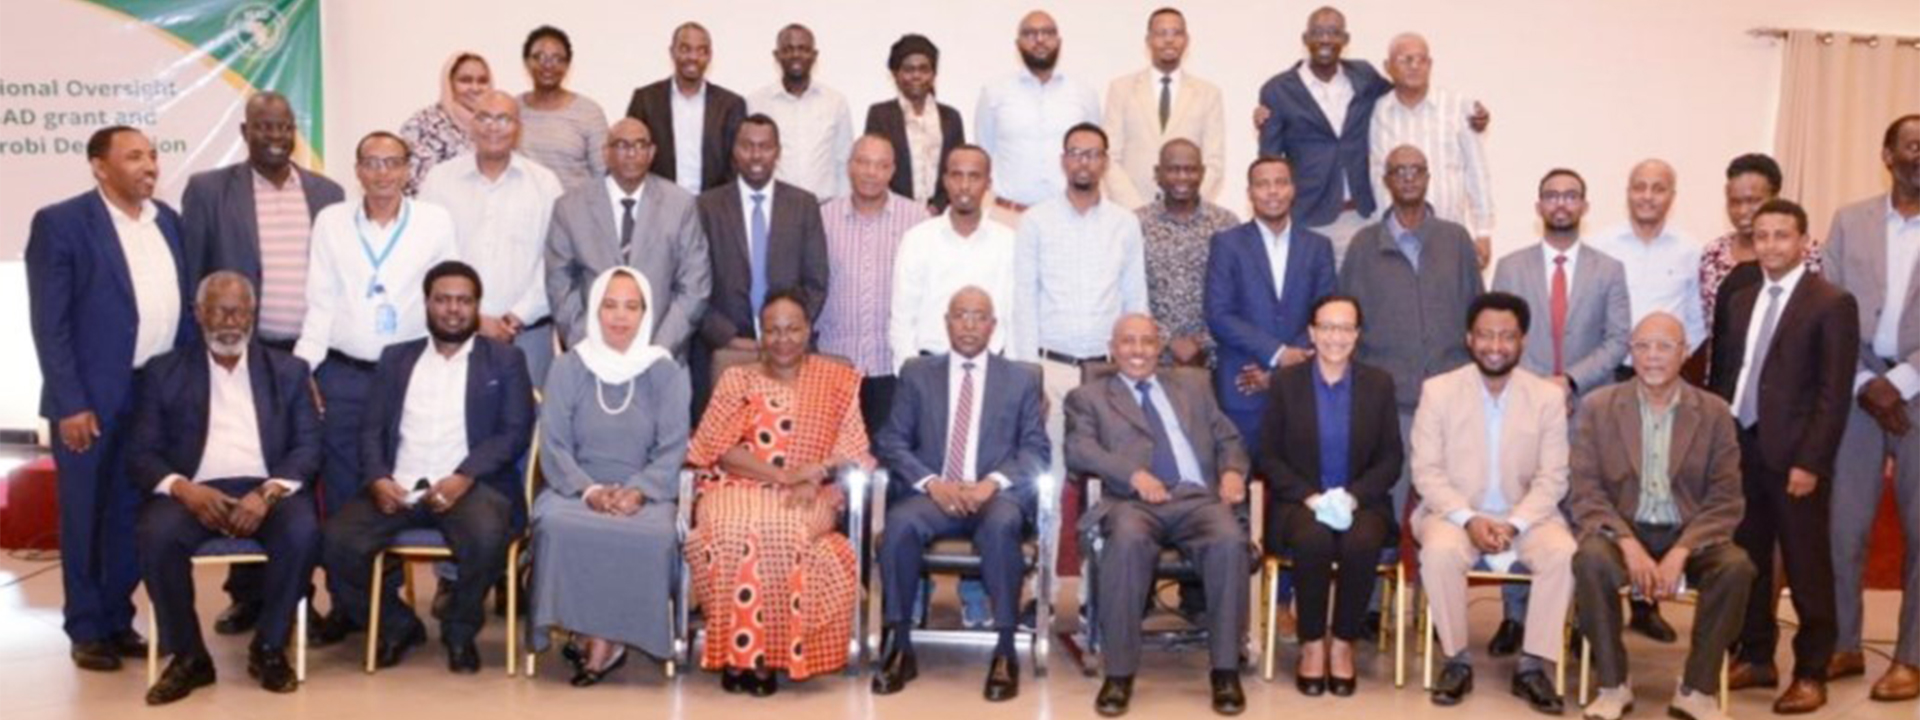 IGAD Conducts its Regional Oversight Committee Meeting for the Global Fund Grant